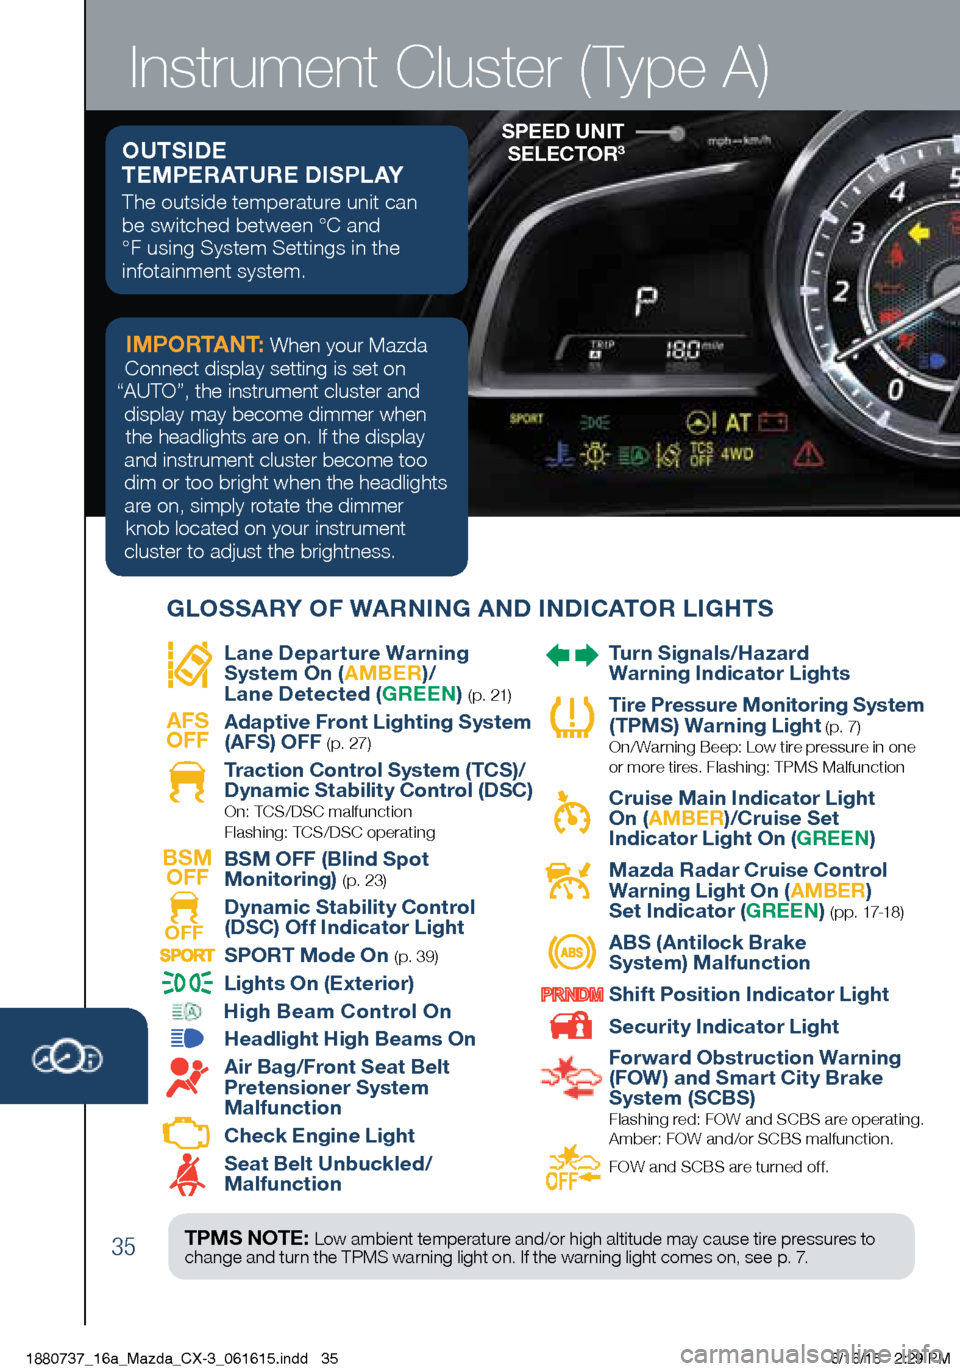 MAZDA MODEL CX-3 2016  Smart Start Guide (in English) 35
Instrument Cluster (Type A)
SPEED UNIT SELECTOR3
   Lane Departure Warning 
System On (
AMBER)/ 
Lane Detected ( GREEN) ( p. 21)
AFS
OFF
    Adaptive Front Lighting System 
(AFS) OFF (p. 27)
 
  Tr